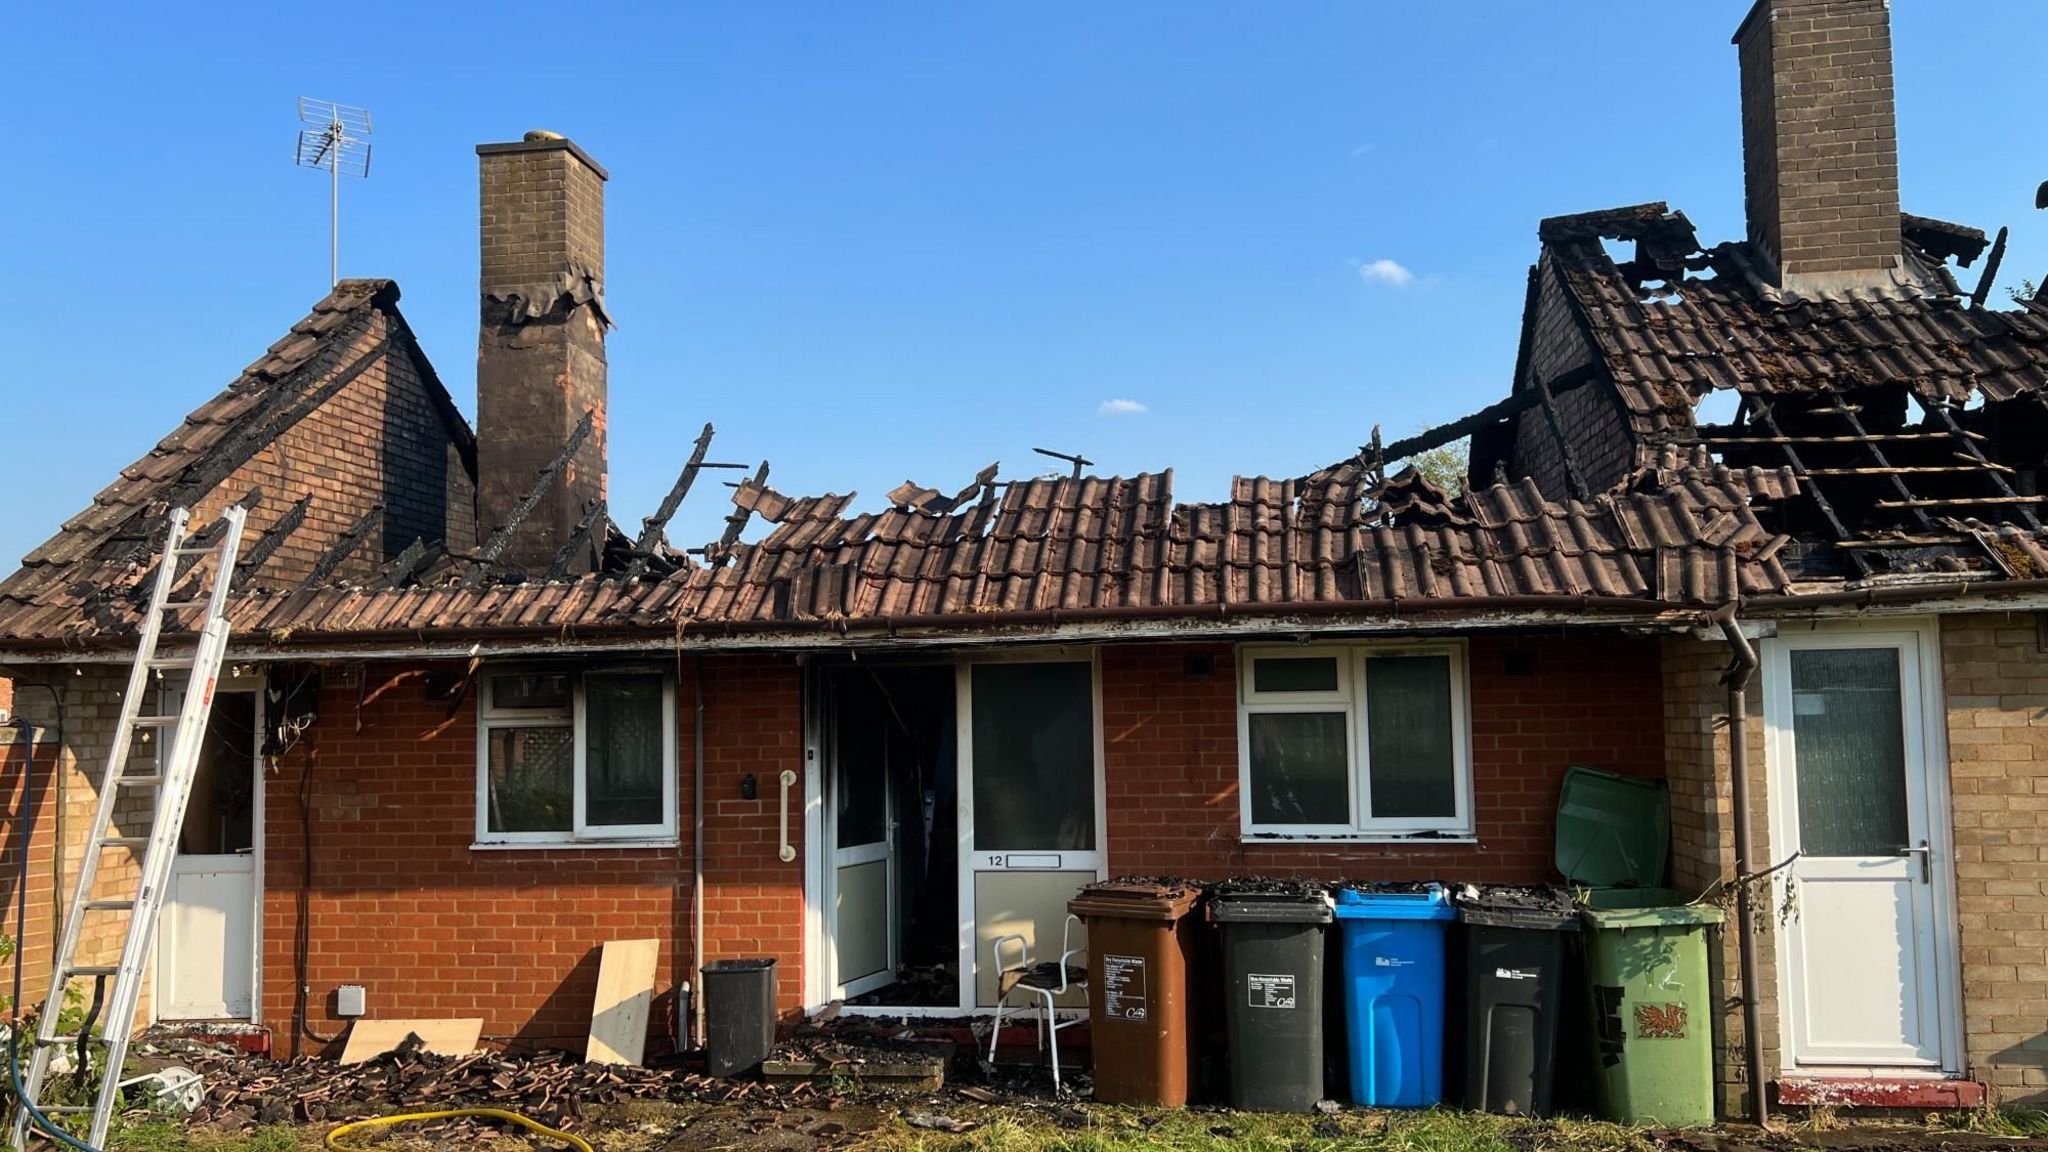 Harrogate Court in Corby with roofs destroyed by fire damage